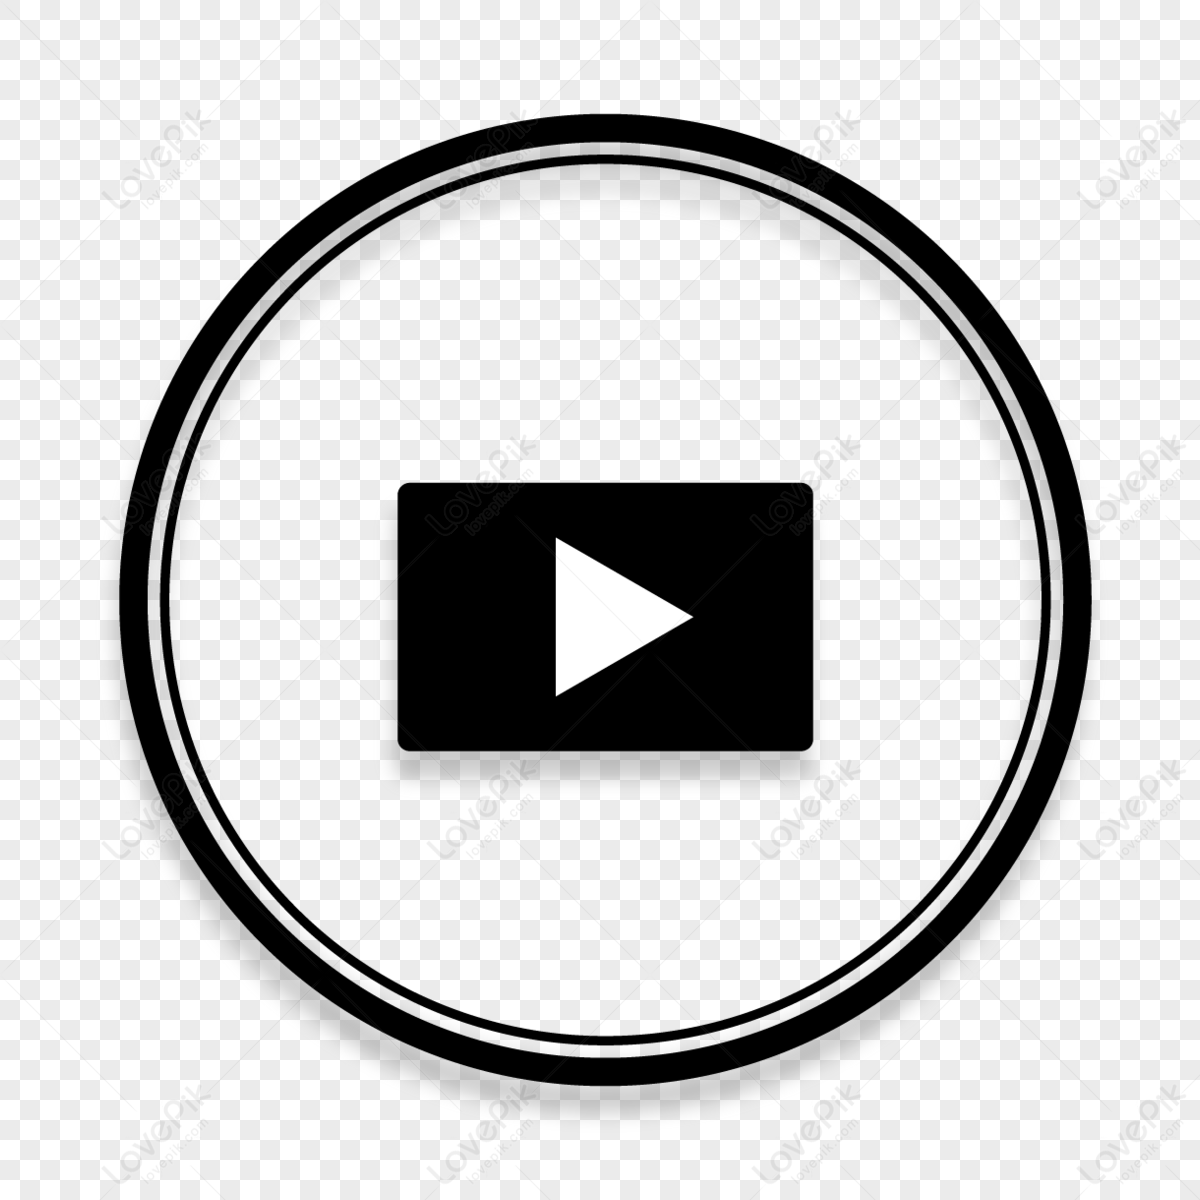 YouTube Logo PNG Transparent Images Free Download - Pngfre